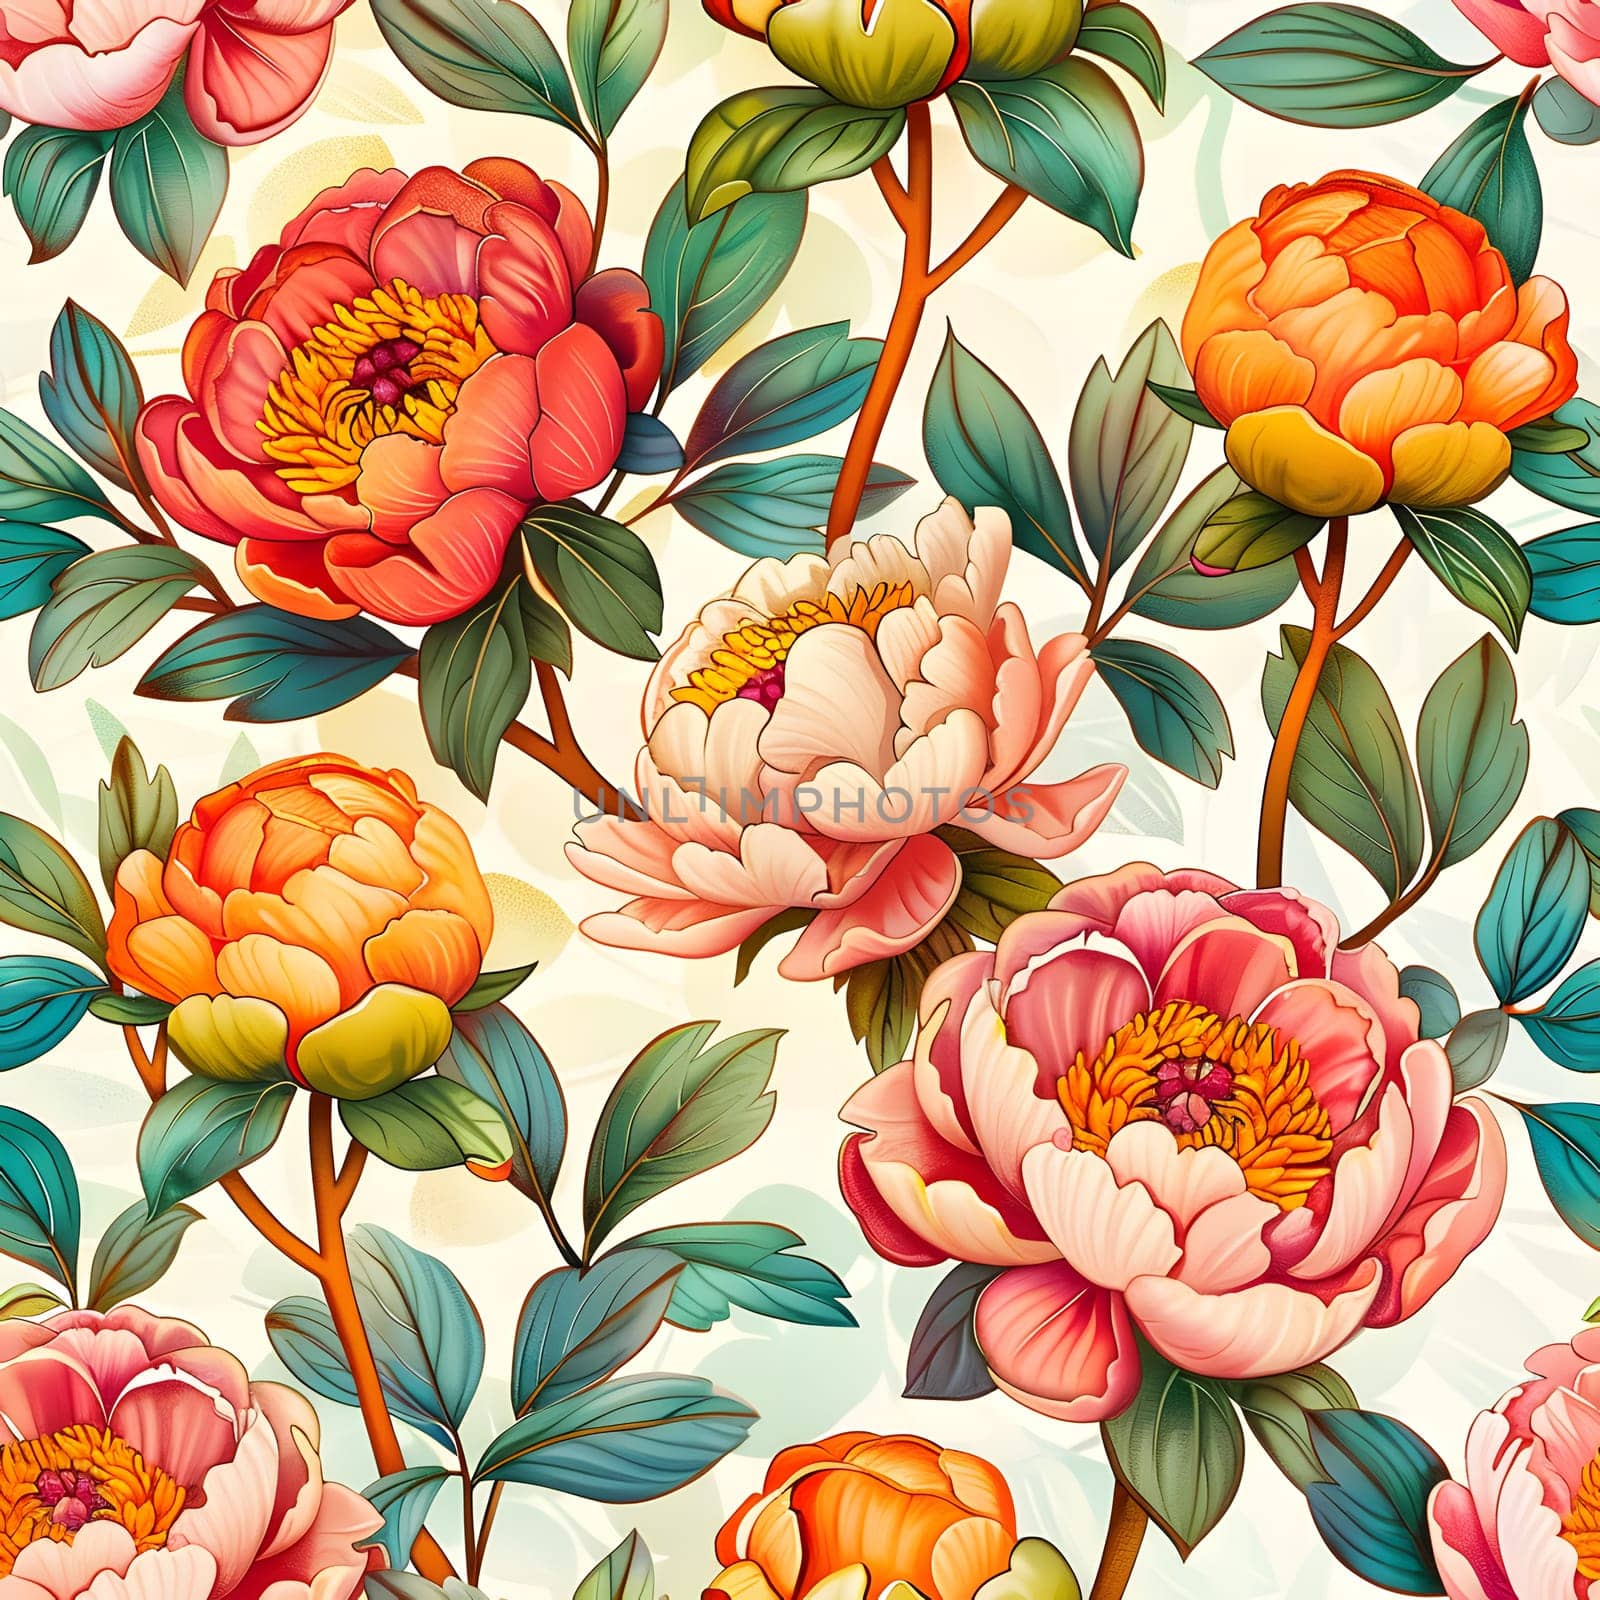 a seamless pattern with pink and orange flowers and green leaves on a white background by Nadtochiy